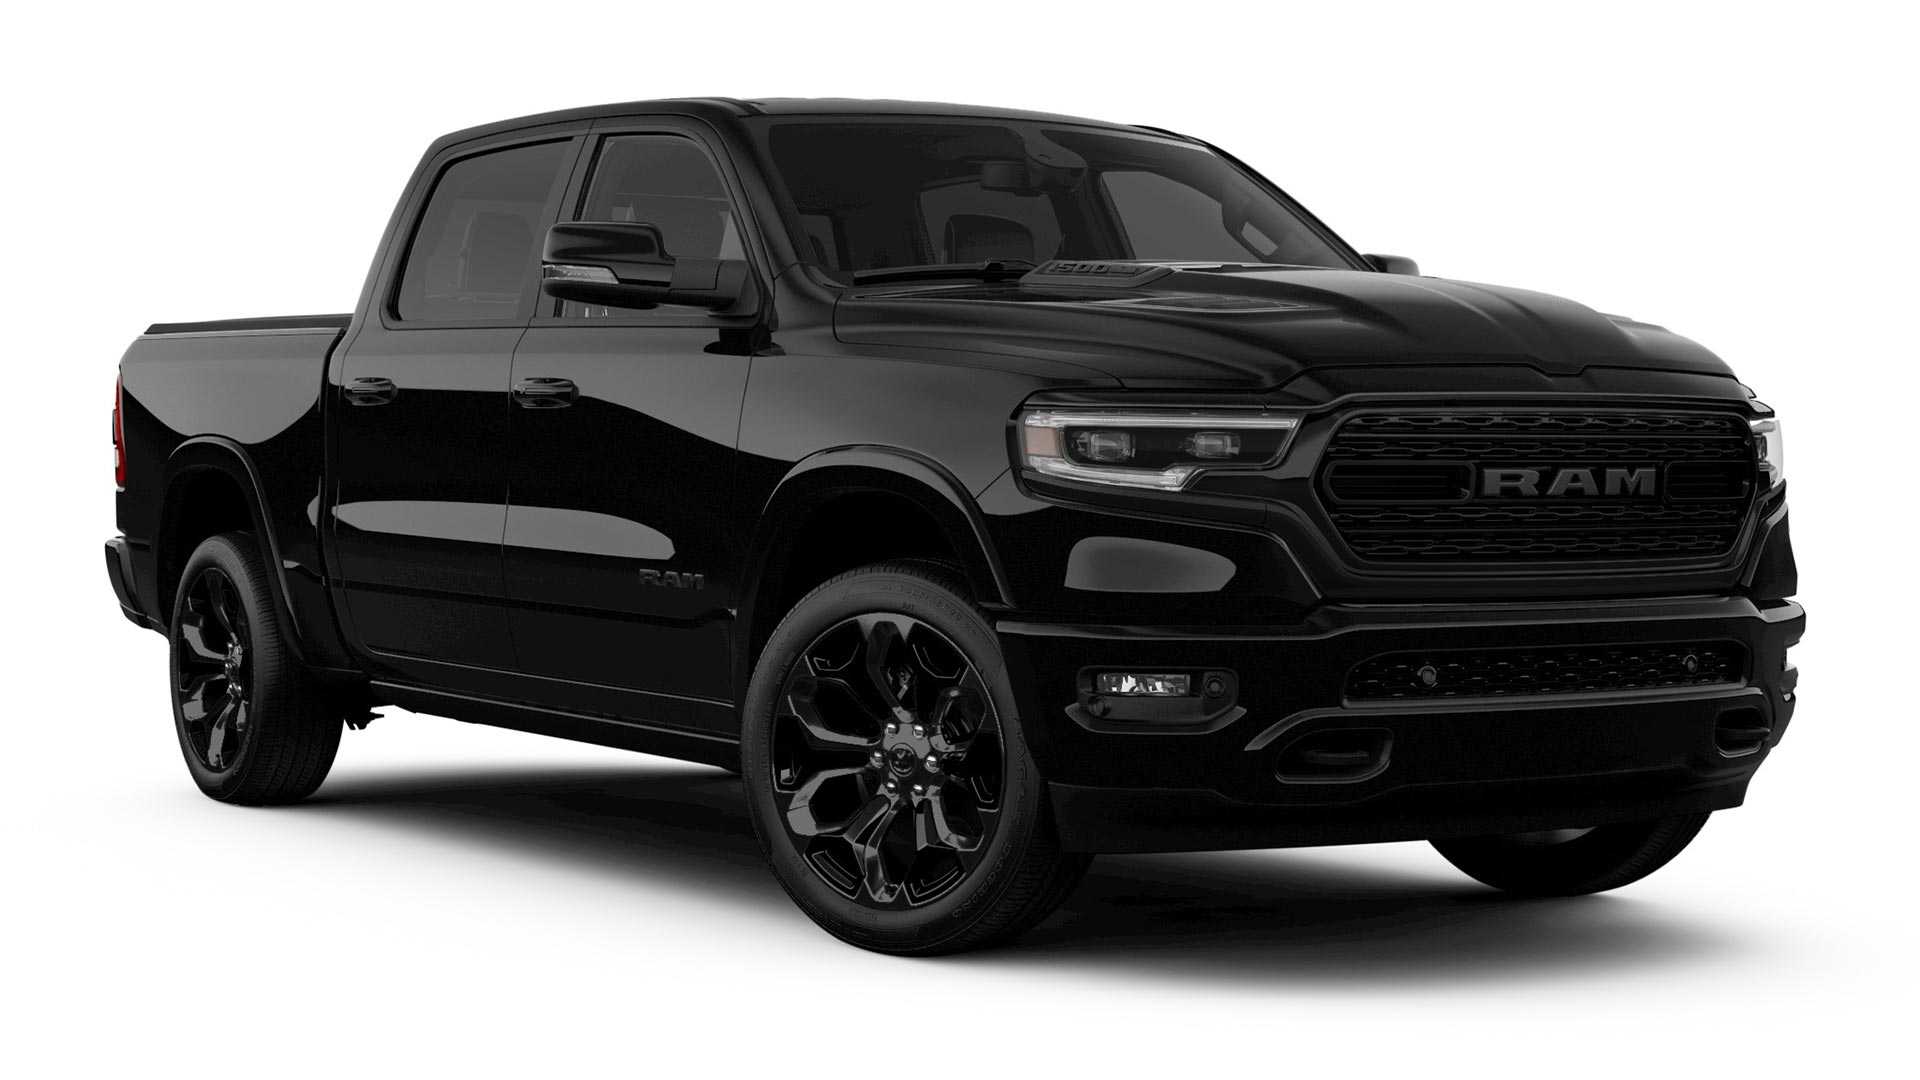 2020 Ram 1500 and Ram Heavy Duty pickup truck special editions